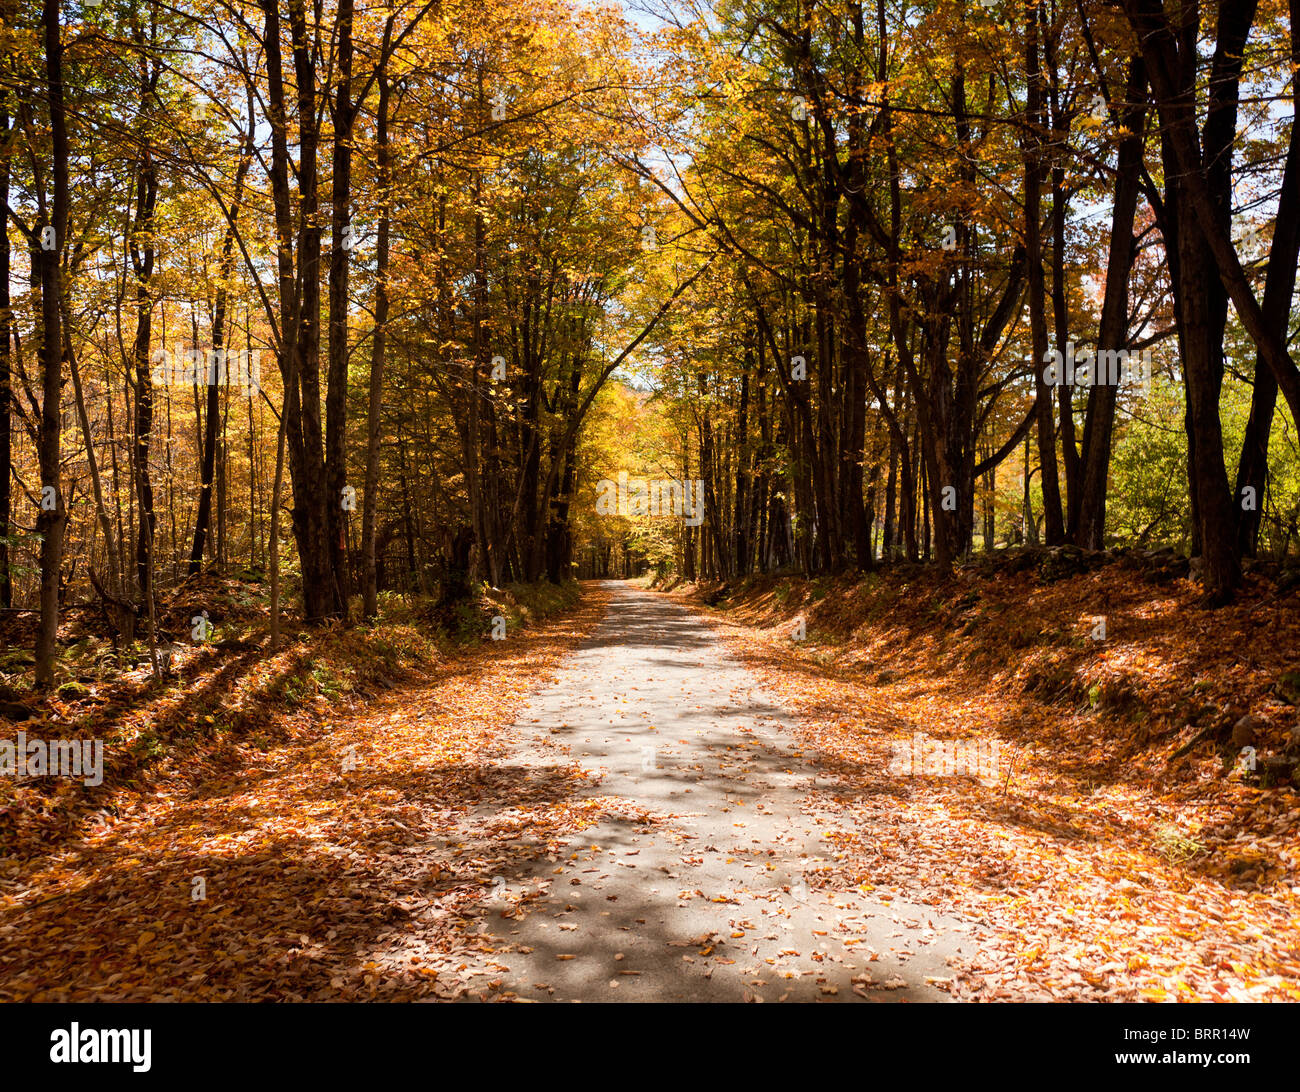 Small rural forest road disappears into the autumn / fall trees Stock Photo